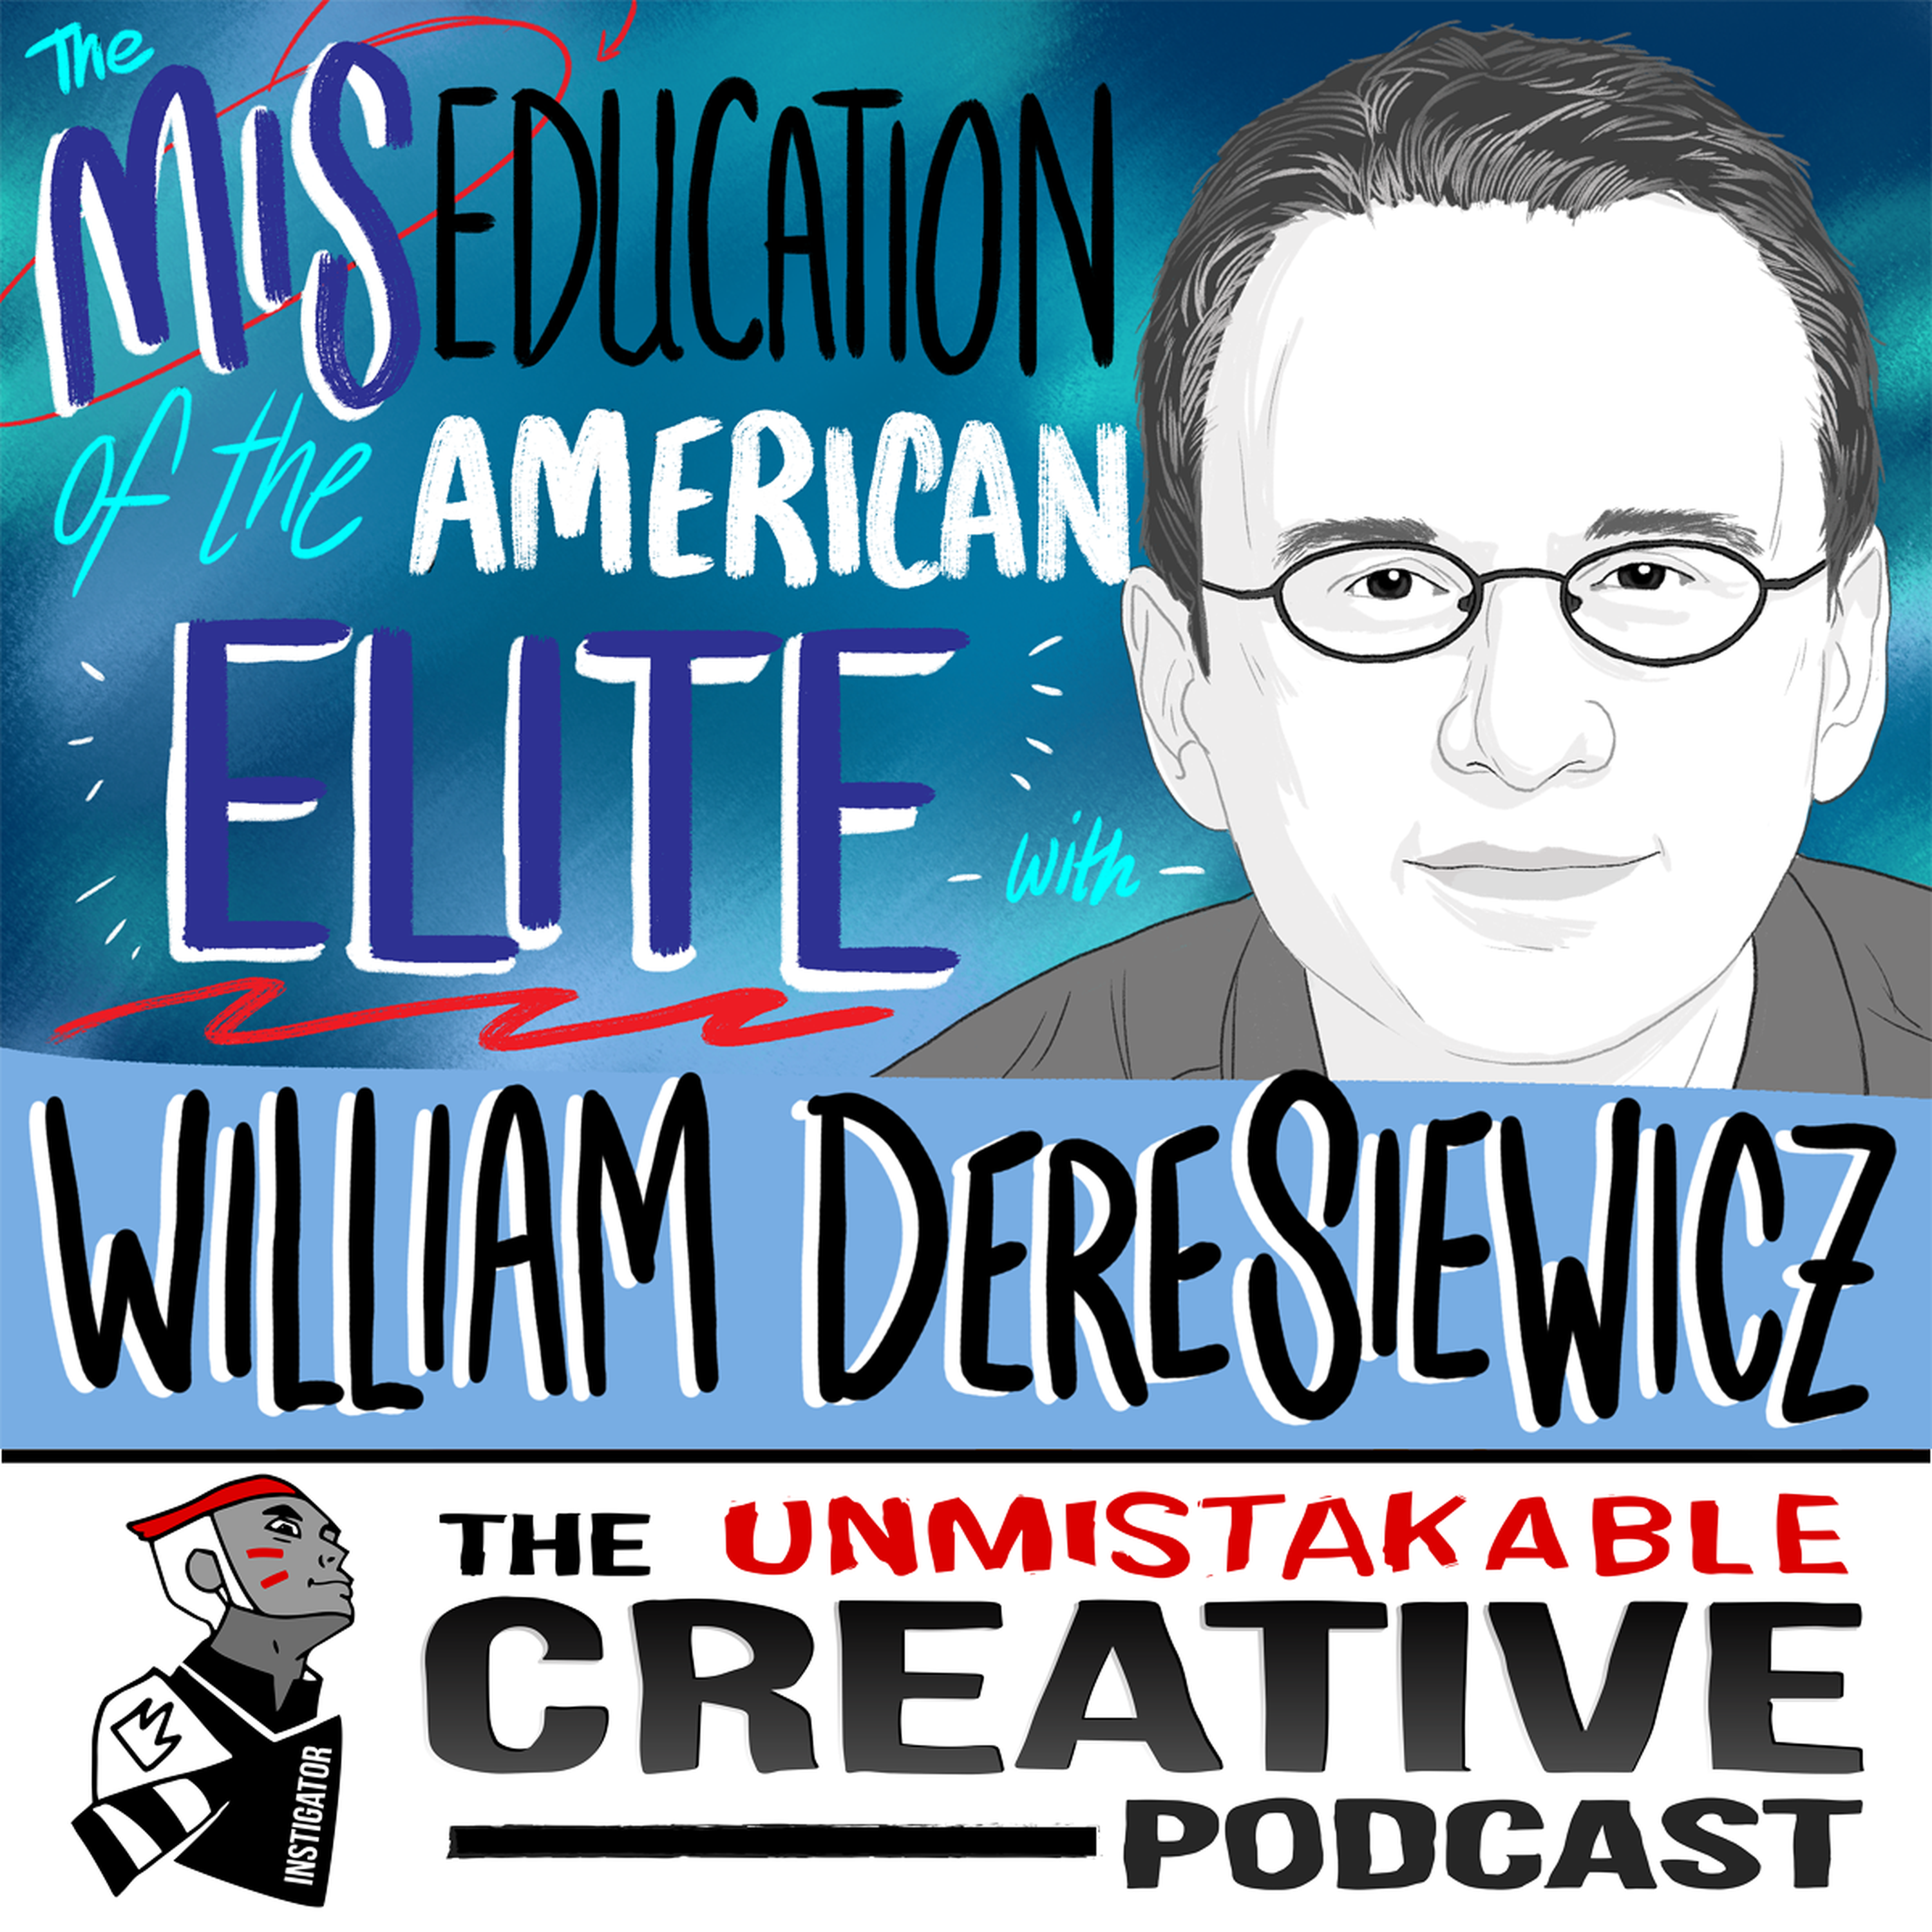 William Deresiewicz: The Miseducation of the American Elite Image